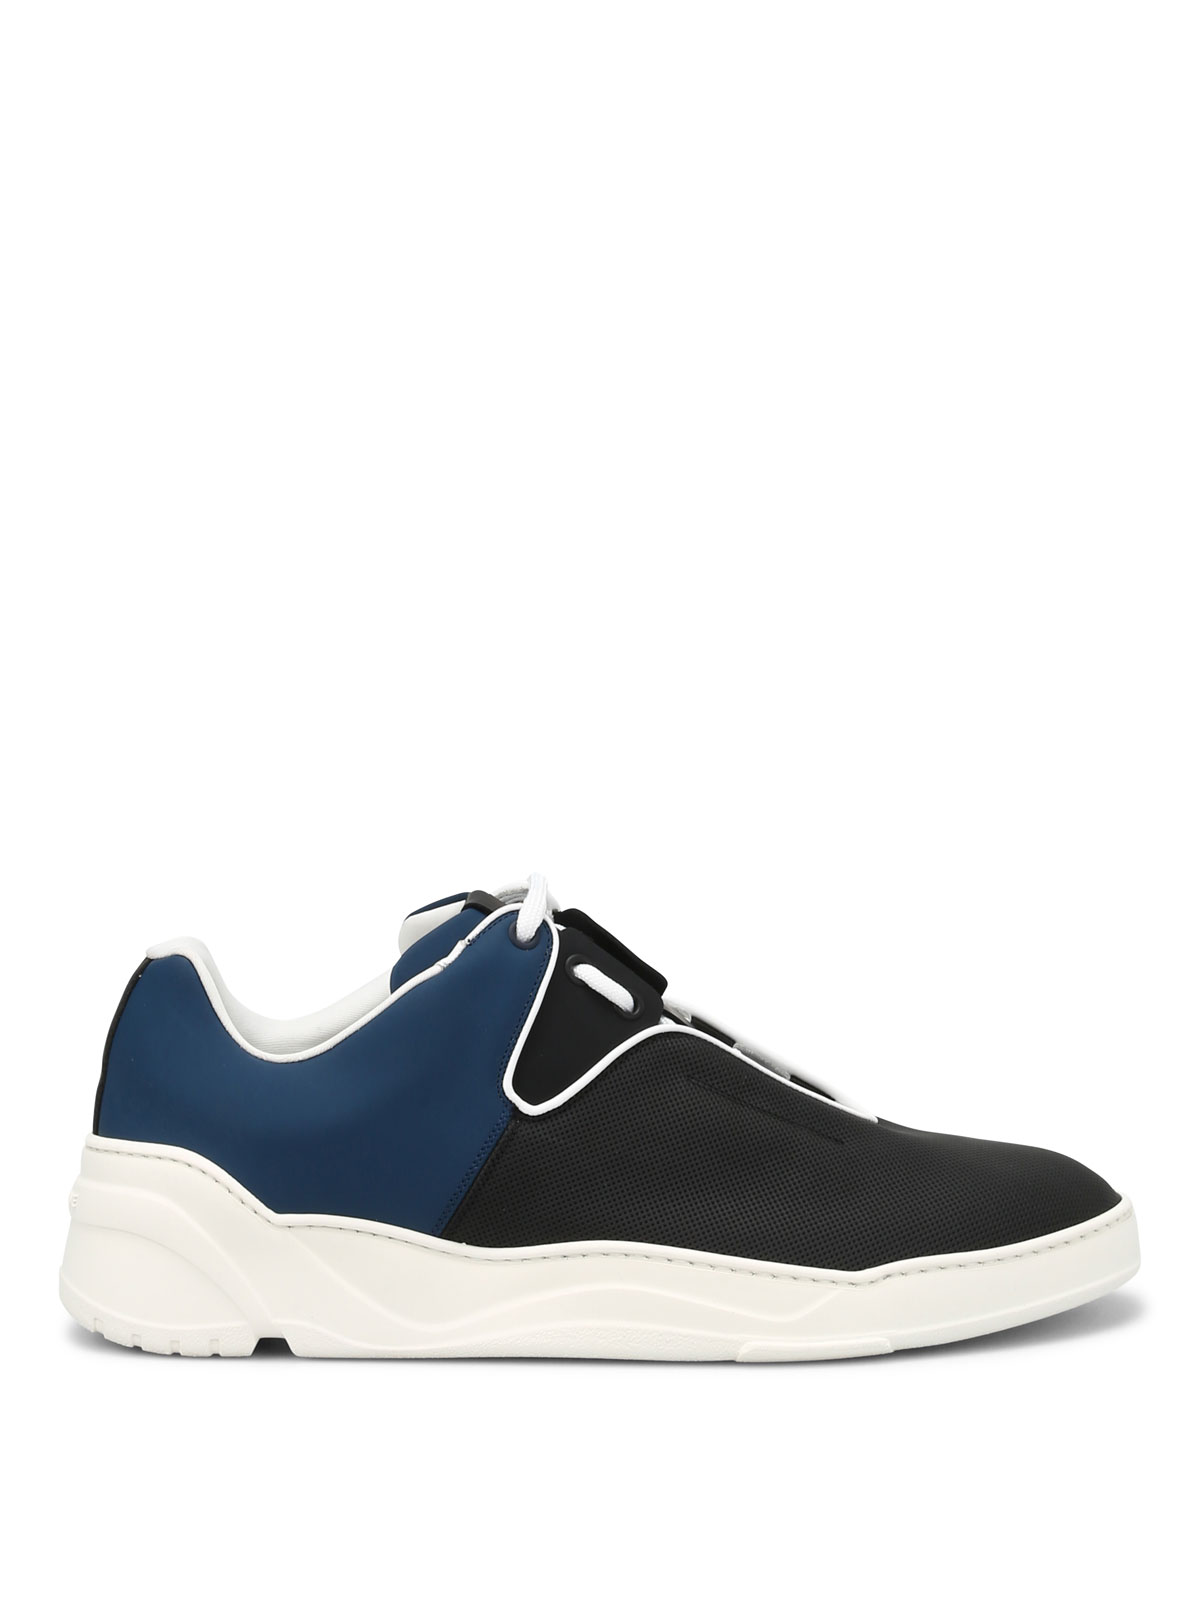 Dior - B17 drilled leather sneakers 